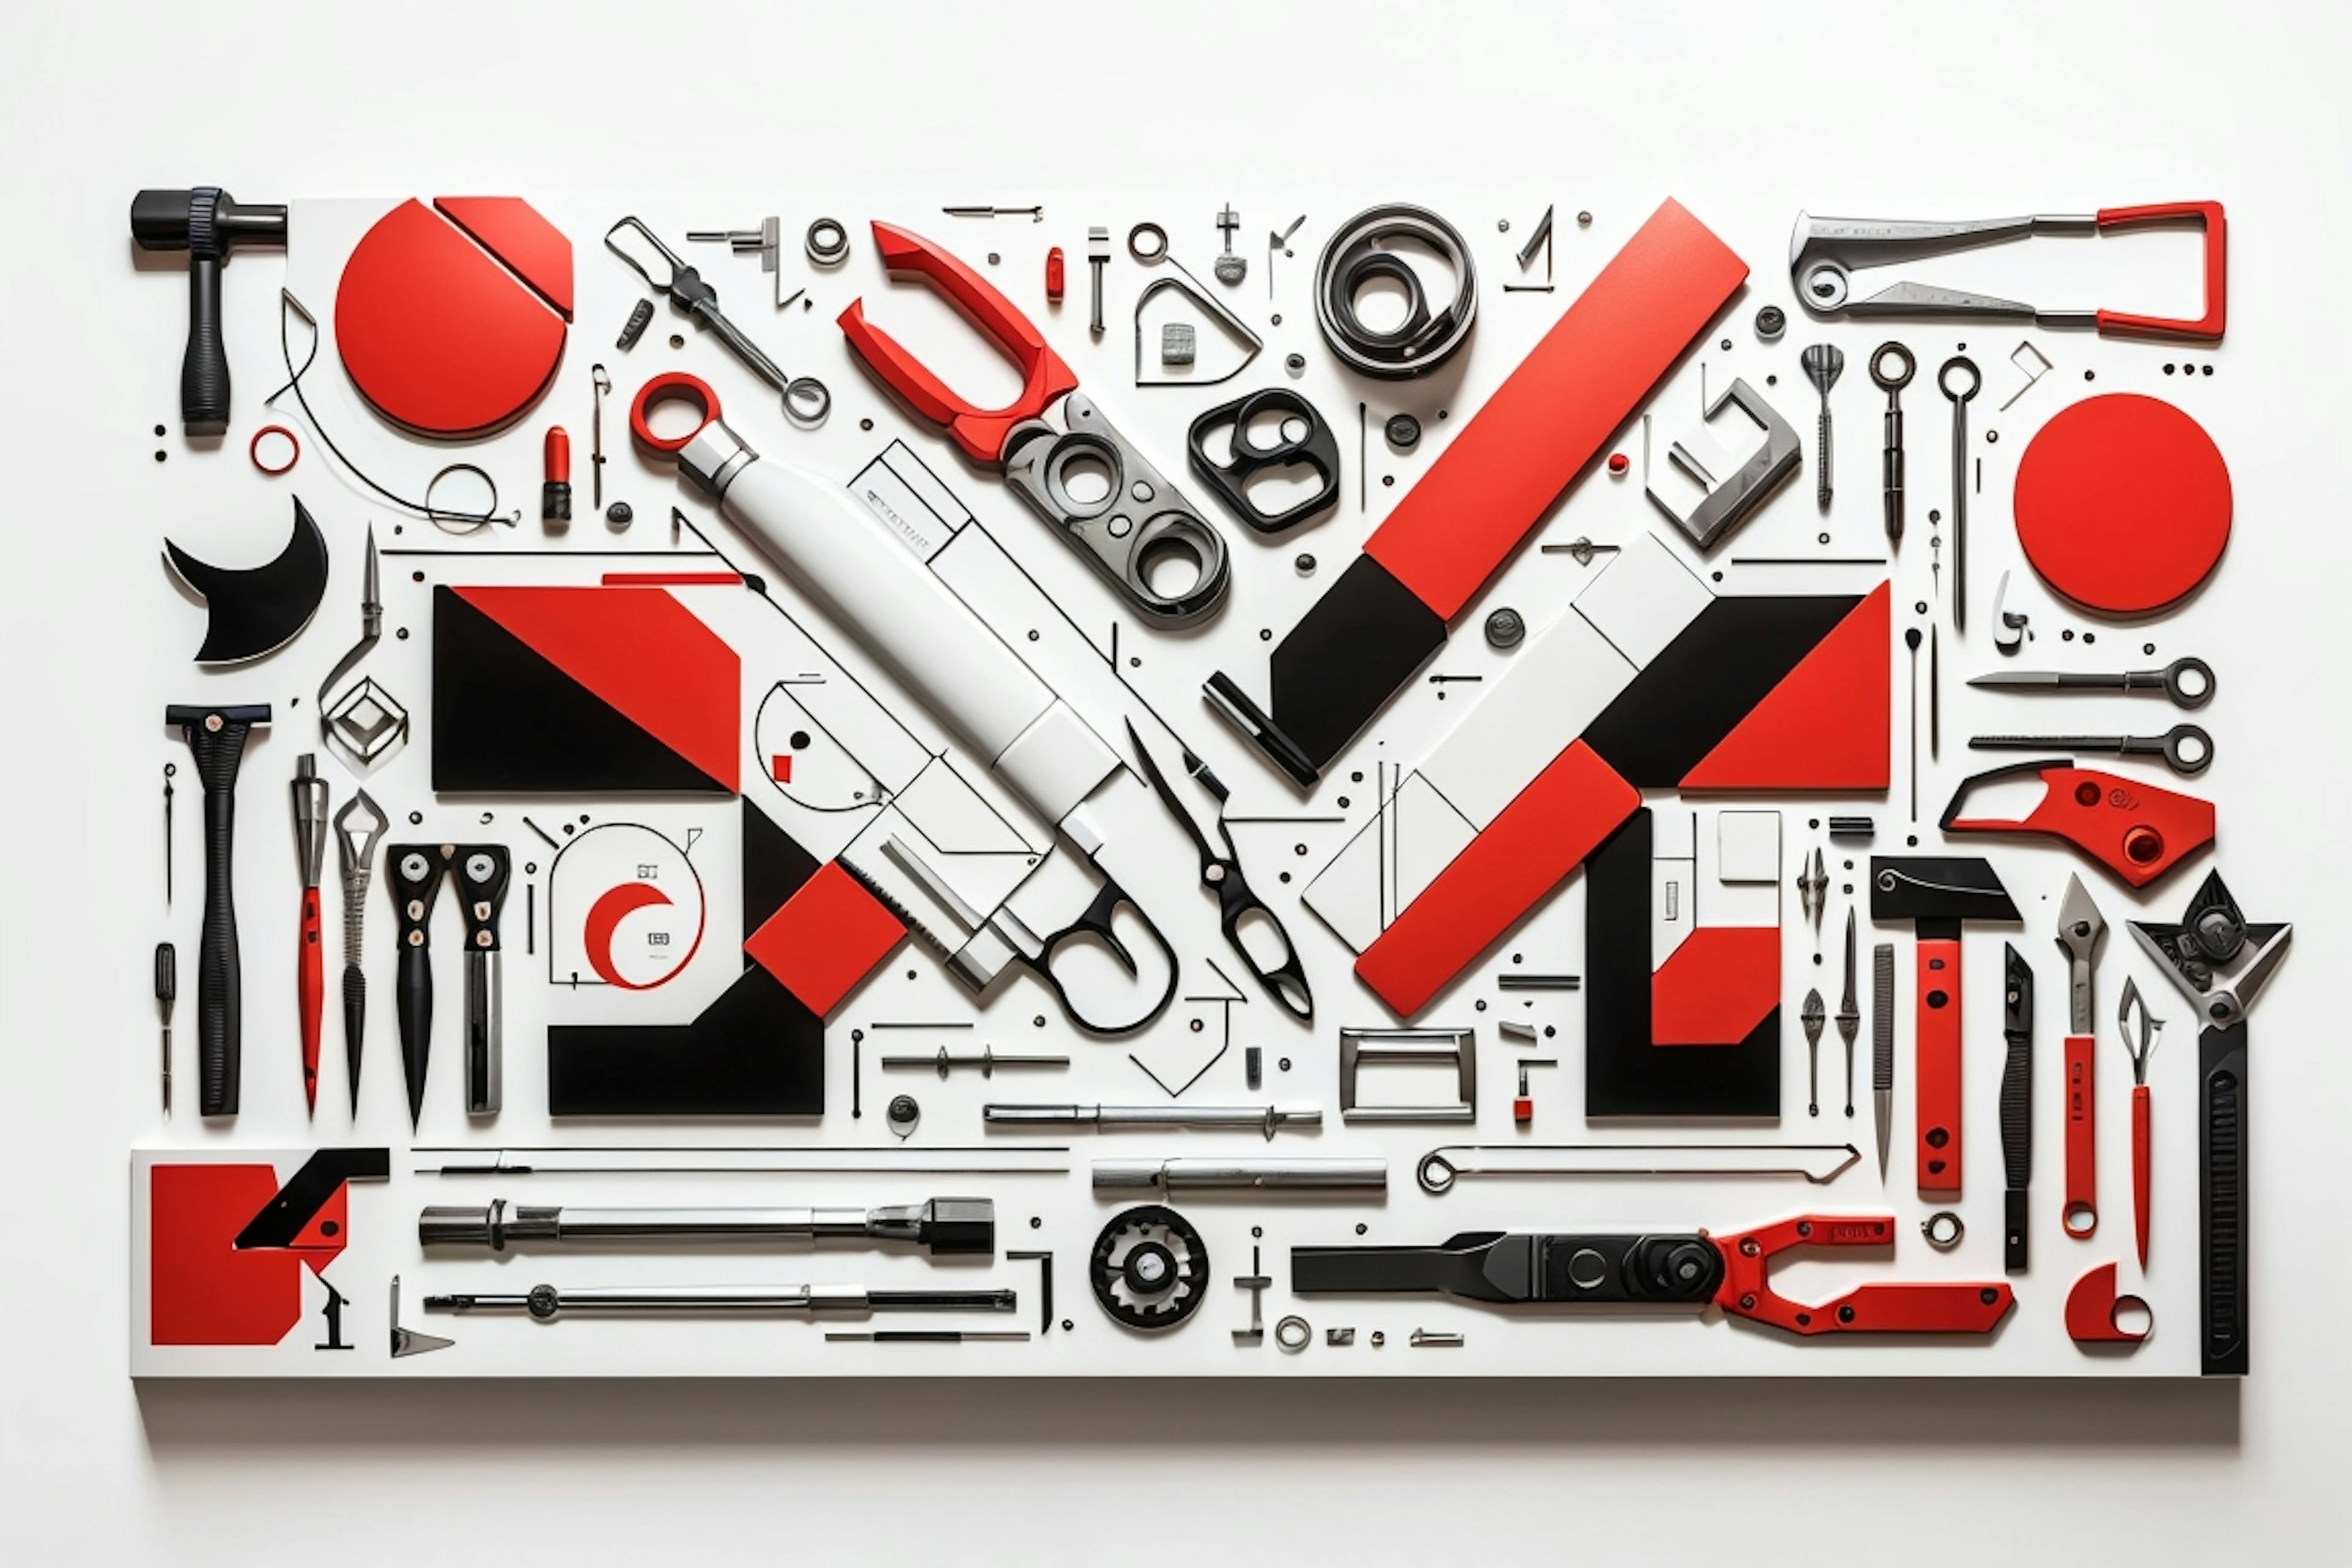 an image of an array of interesting and creative tools, featured primarily in red